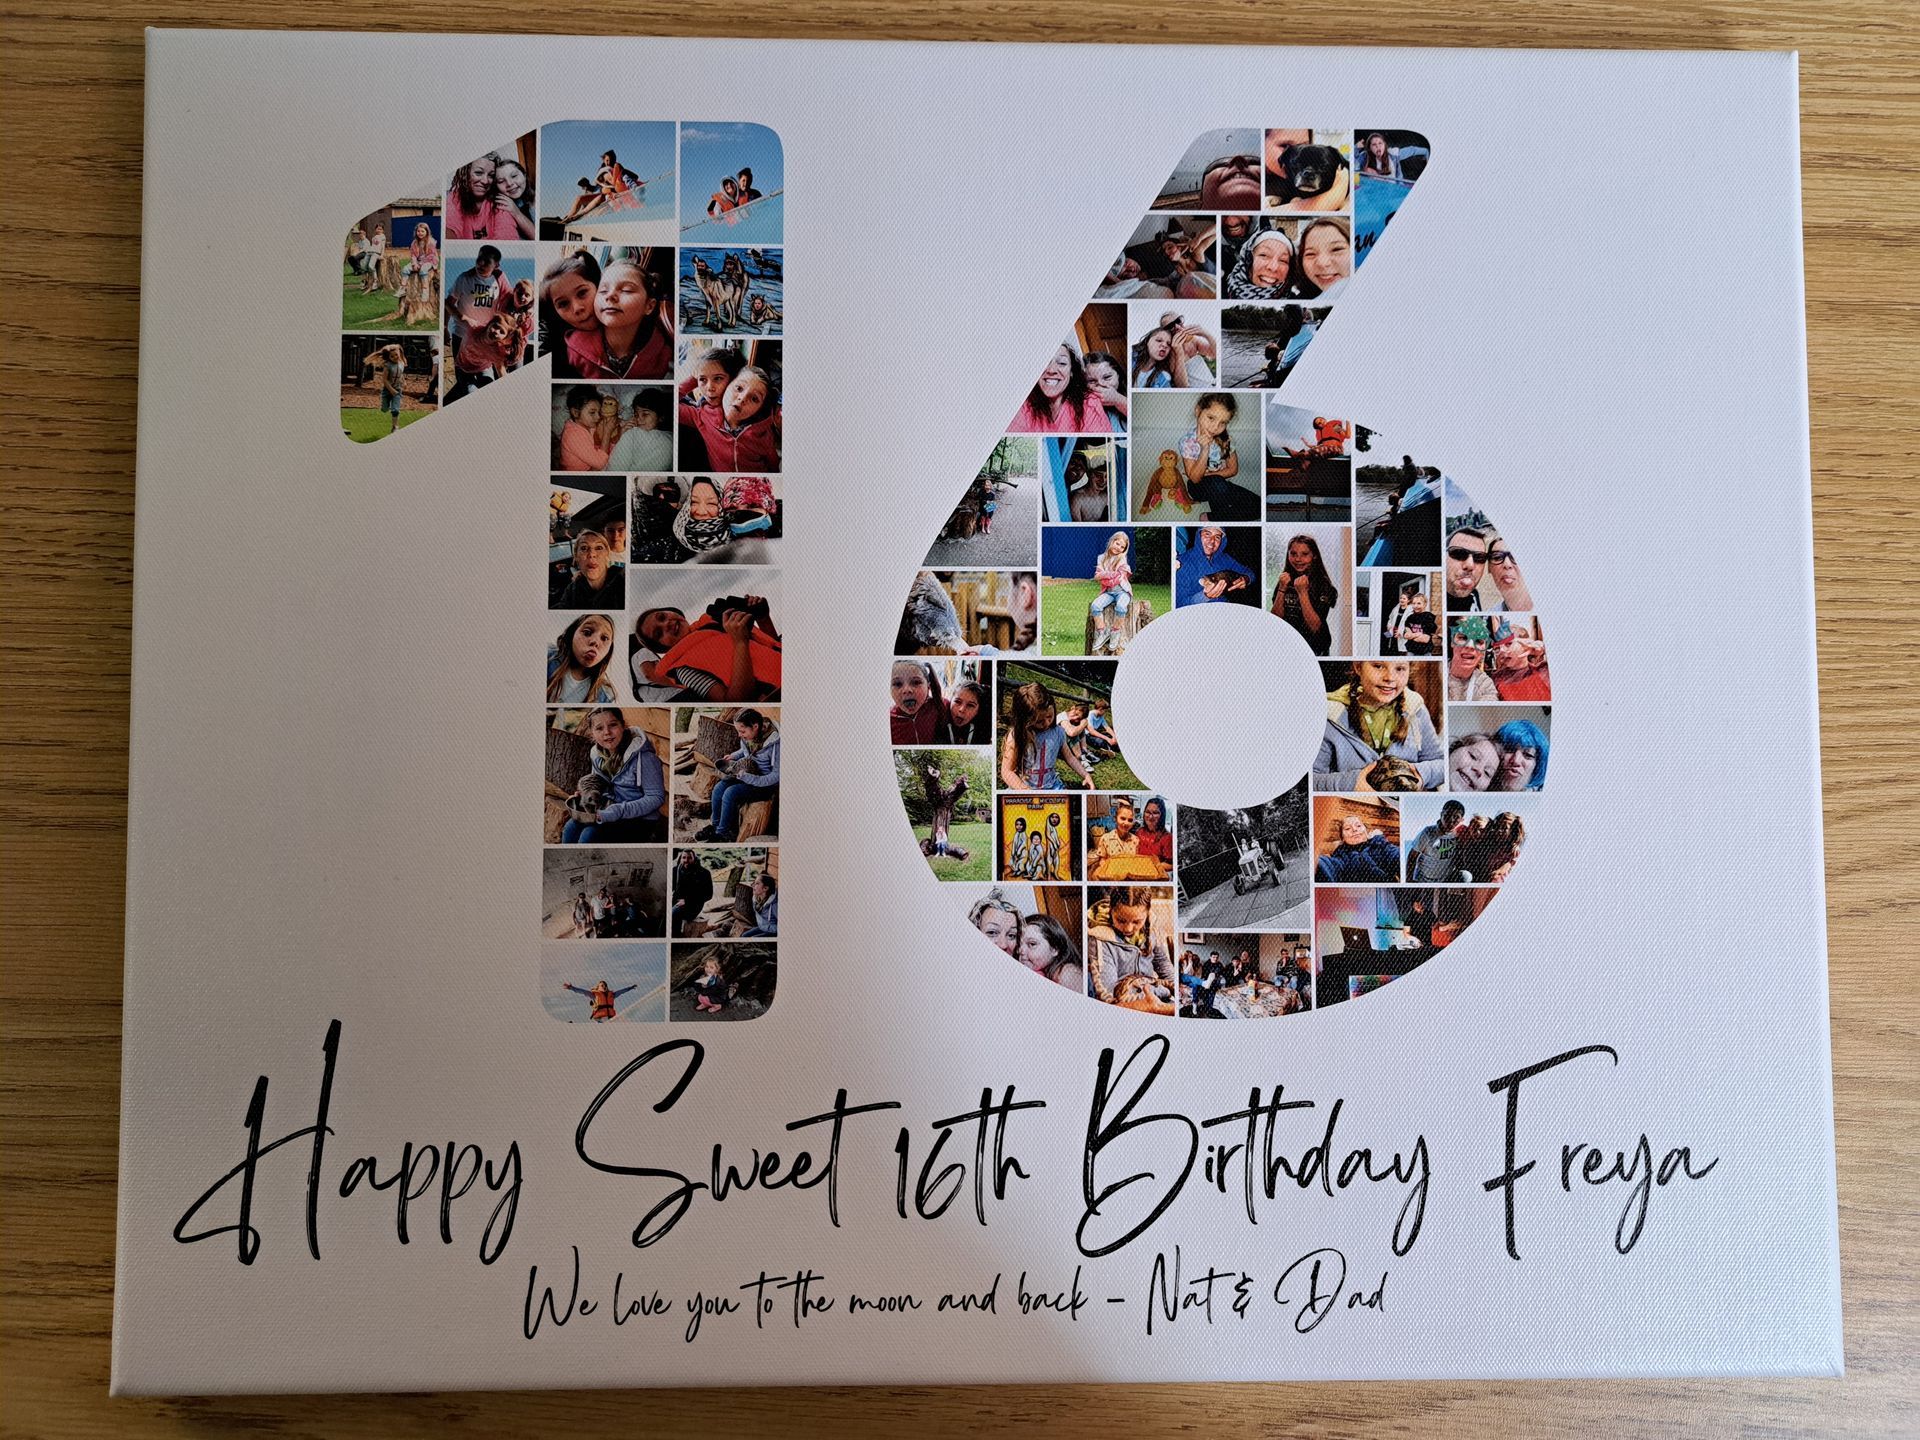 personalised gift ideas, custom milestone photo collages, number photo collages for birthday and anniversary gifts, canvas photo collage gift ideas, gift photo art, personalised gifts, lovely photo collages for celebrating different milestones, printing service, printing your photos to canvas, 